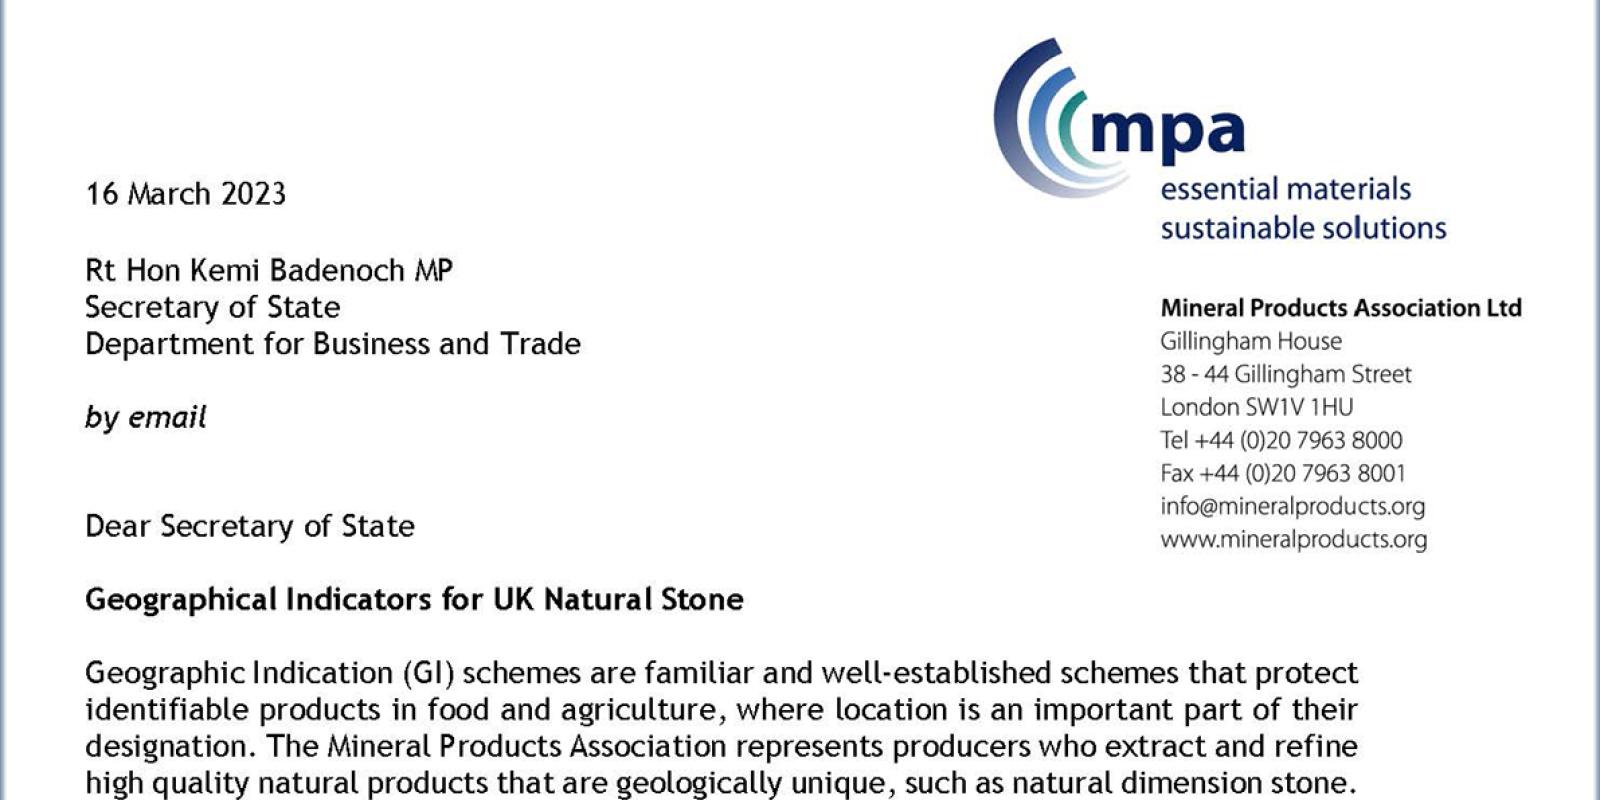 Letter from Jon Prichard, Chief Executive of the MPA